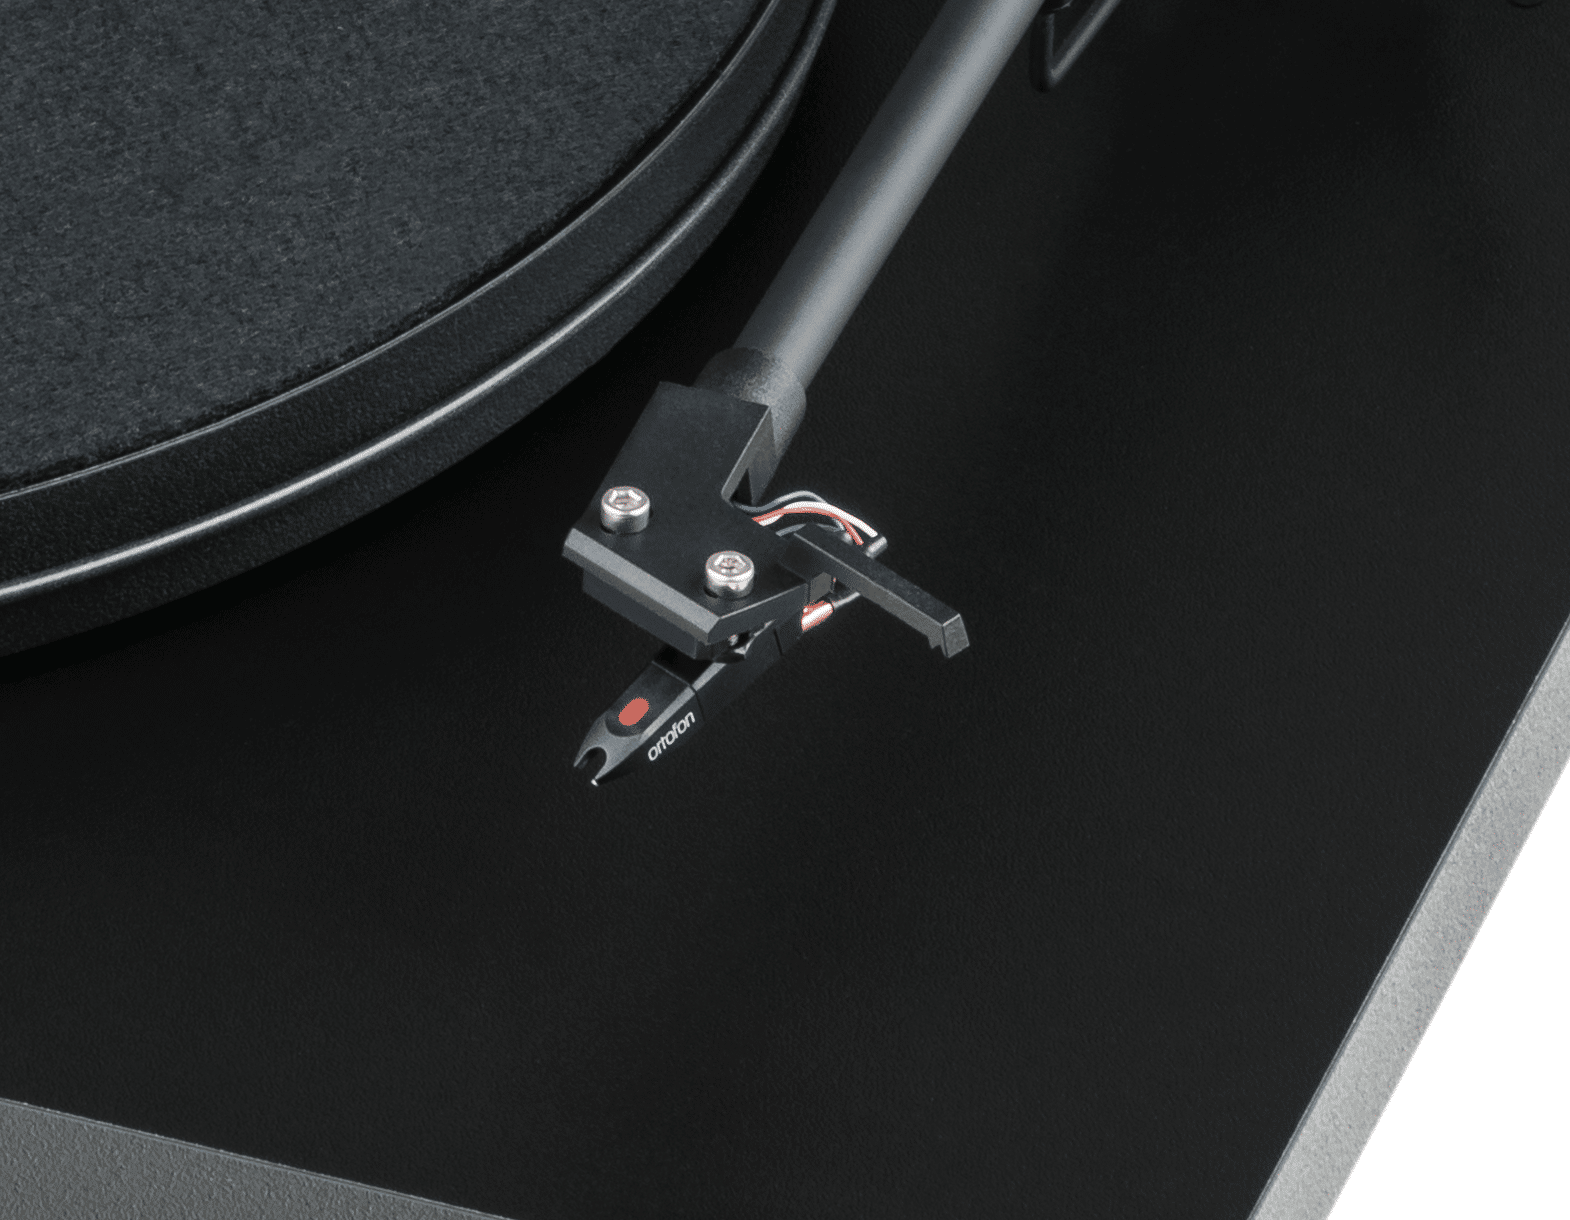 Primary E From Pro-Ject